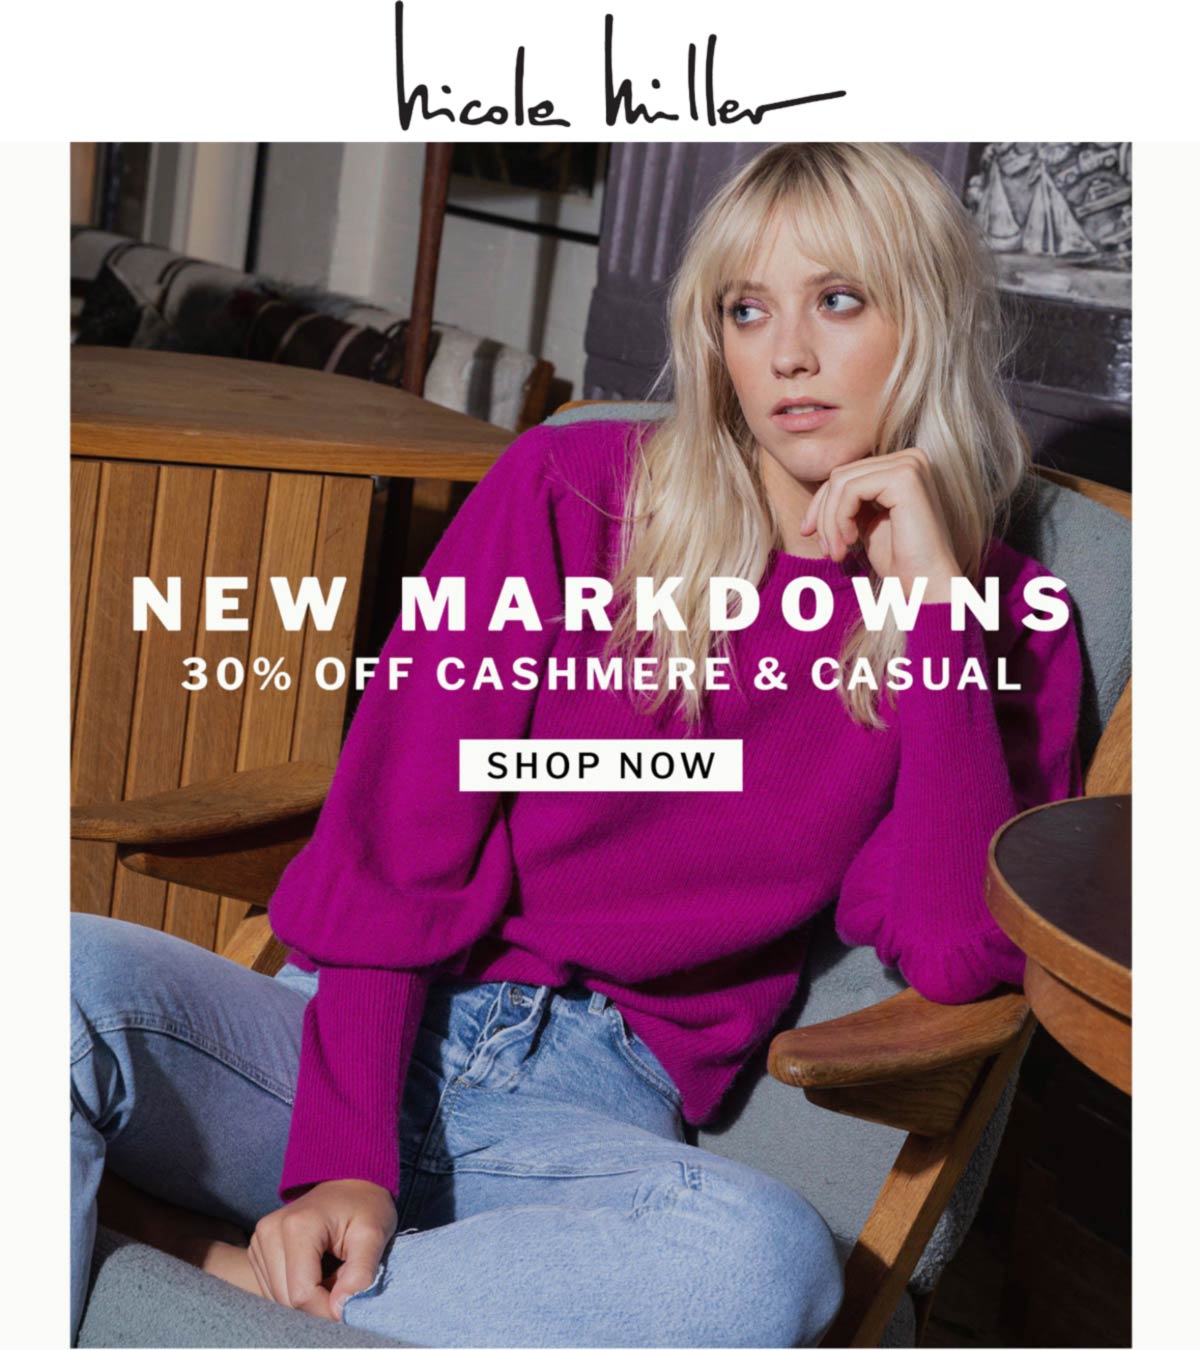 Nicole Miller stores Coupon  30% off casual & cashmere at Nicole Miller #nicolemiller 